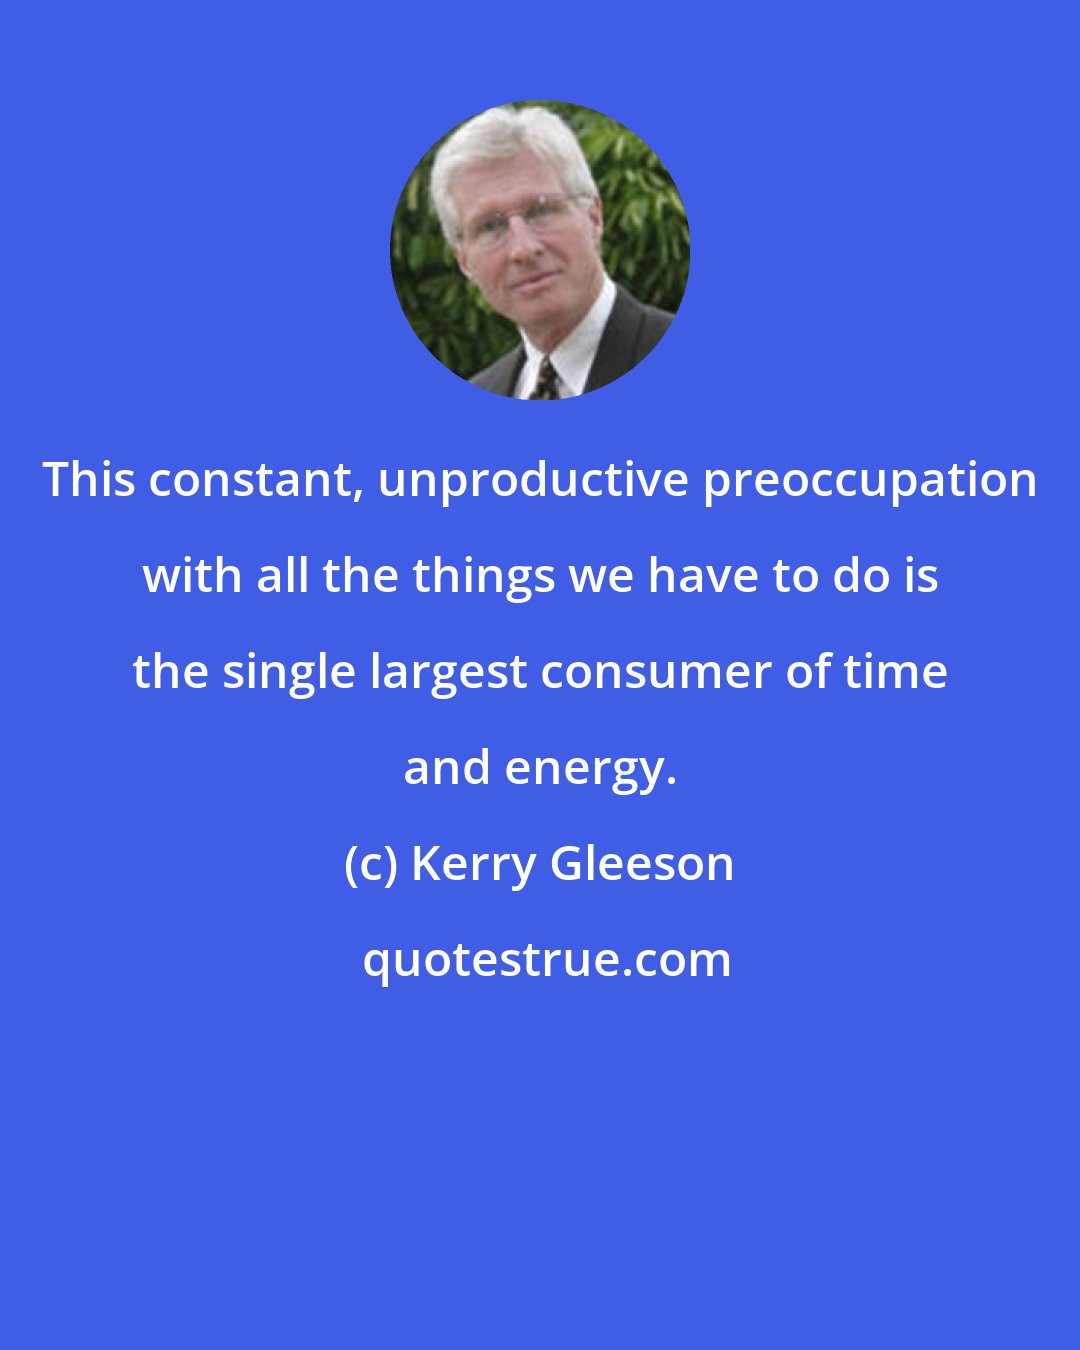 Kerry Gleeson: This constant, unproductive preoccupation with all the things we have to do is the single largest consumer of time and energy.